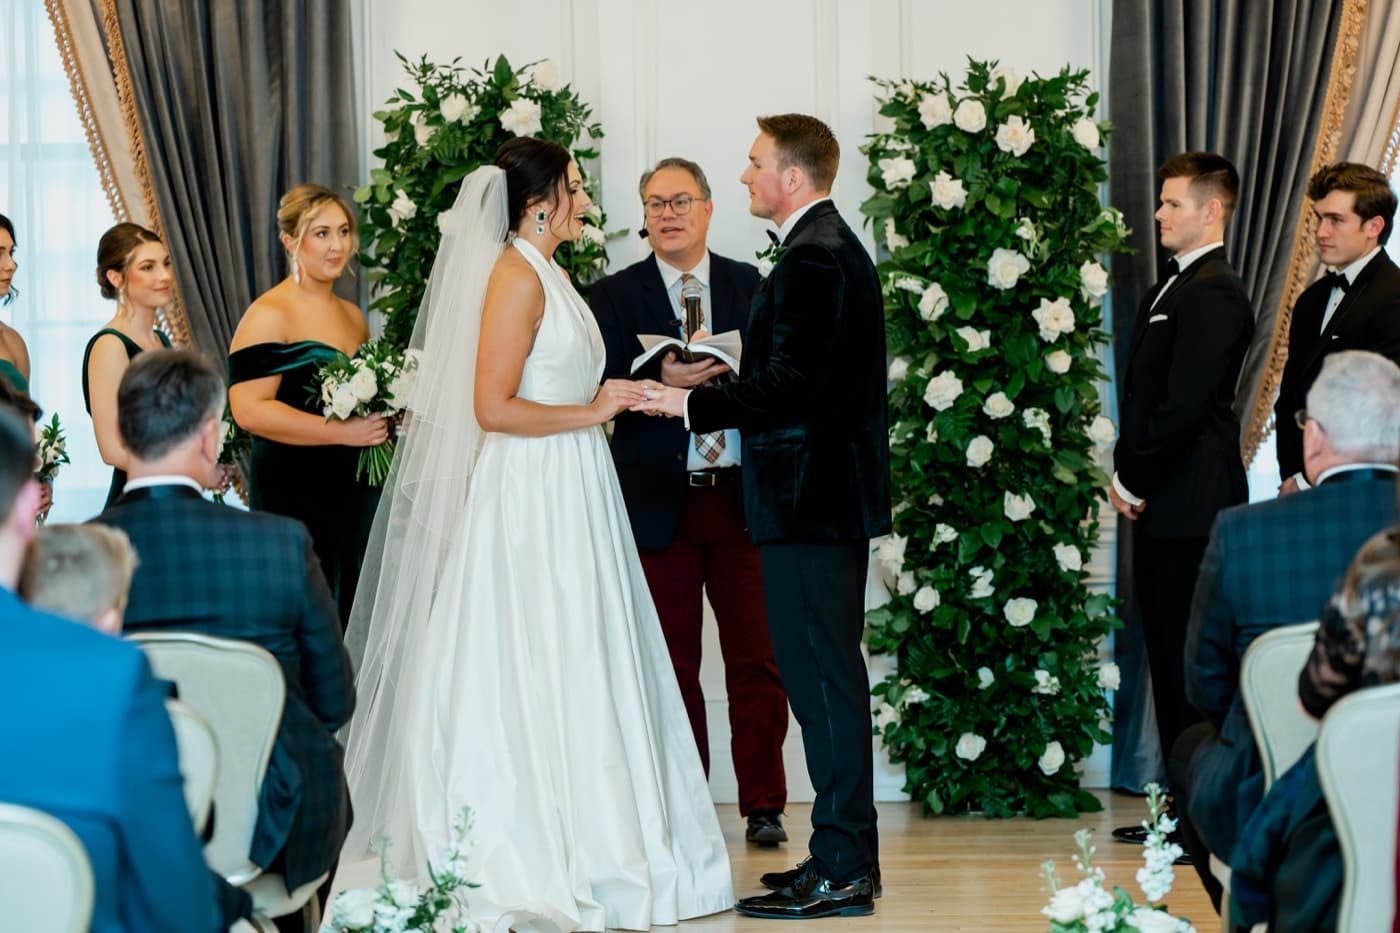 48 exchanging rings at hotel fort des moines wedding ceremony 1